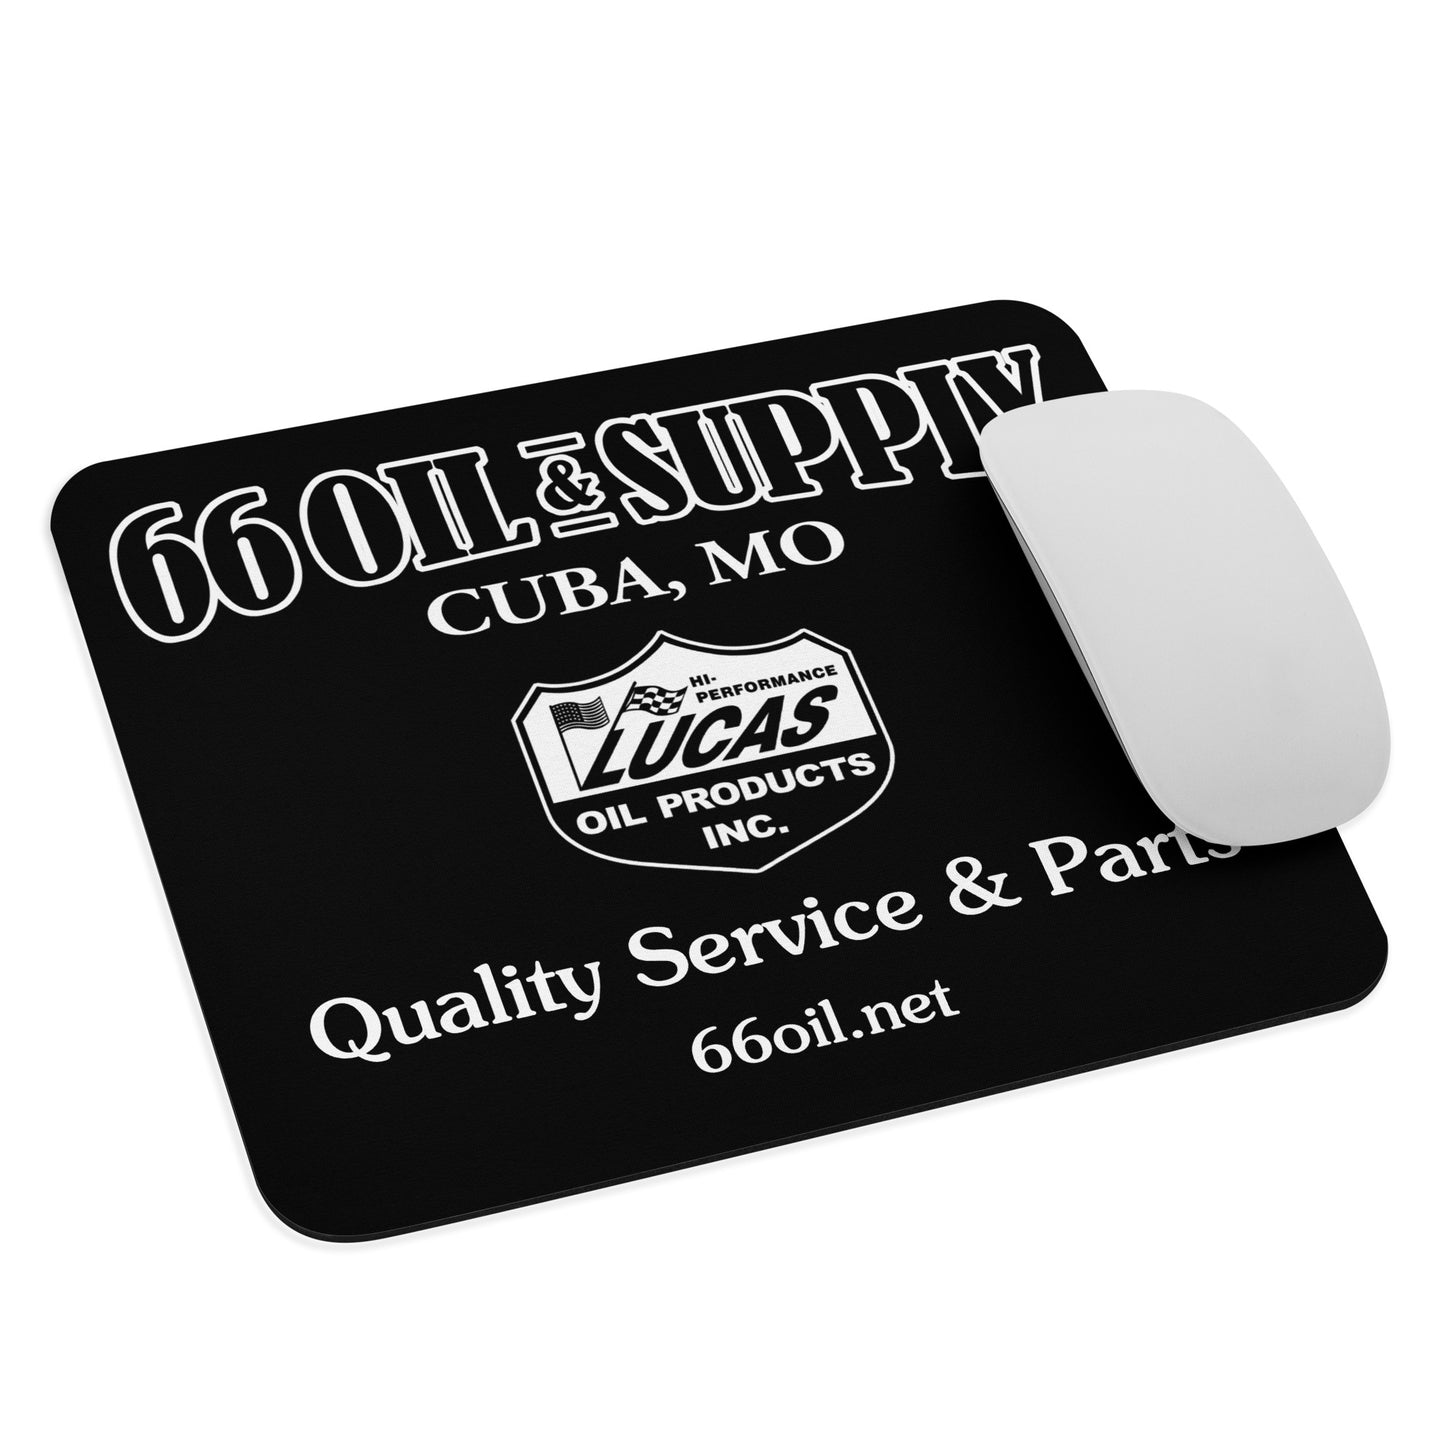 66 Oil & Supply Co. Mouse Pad